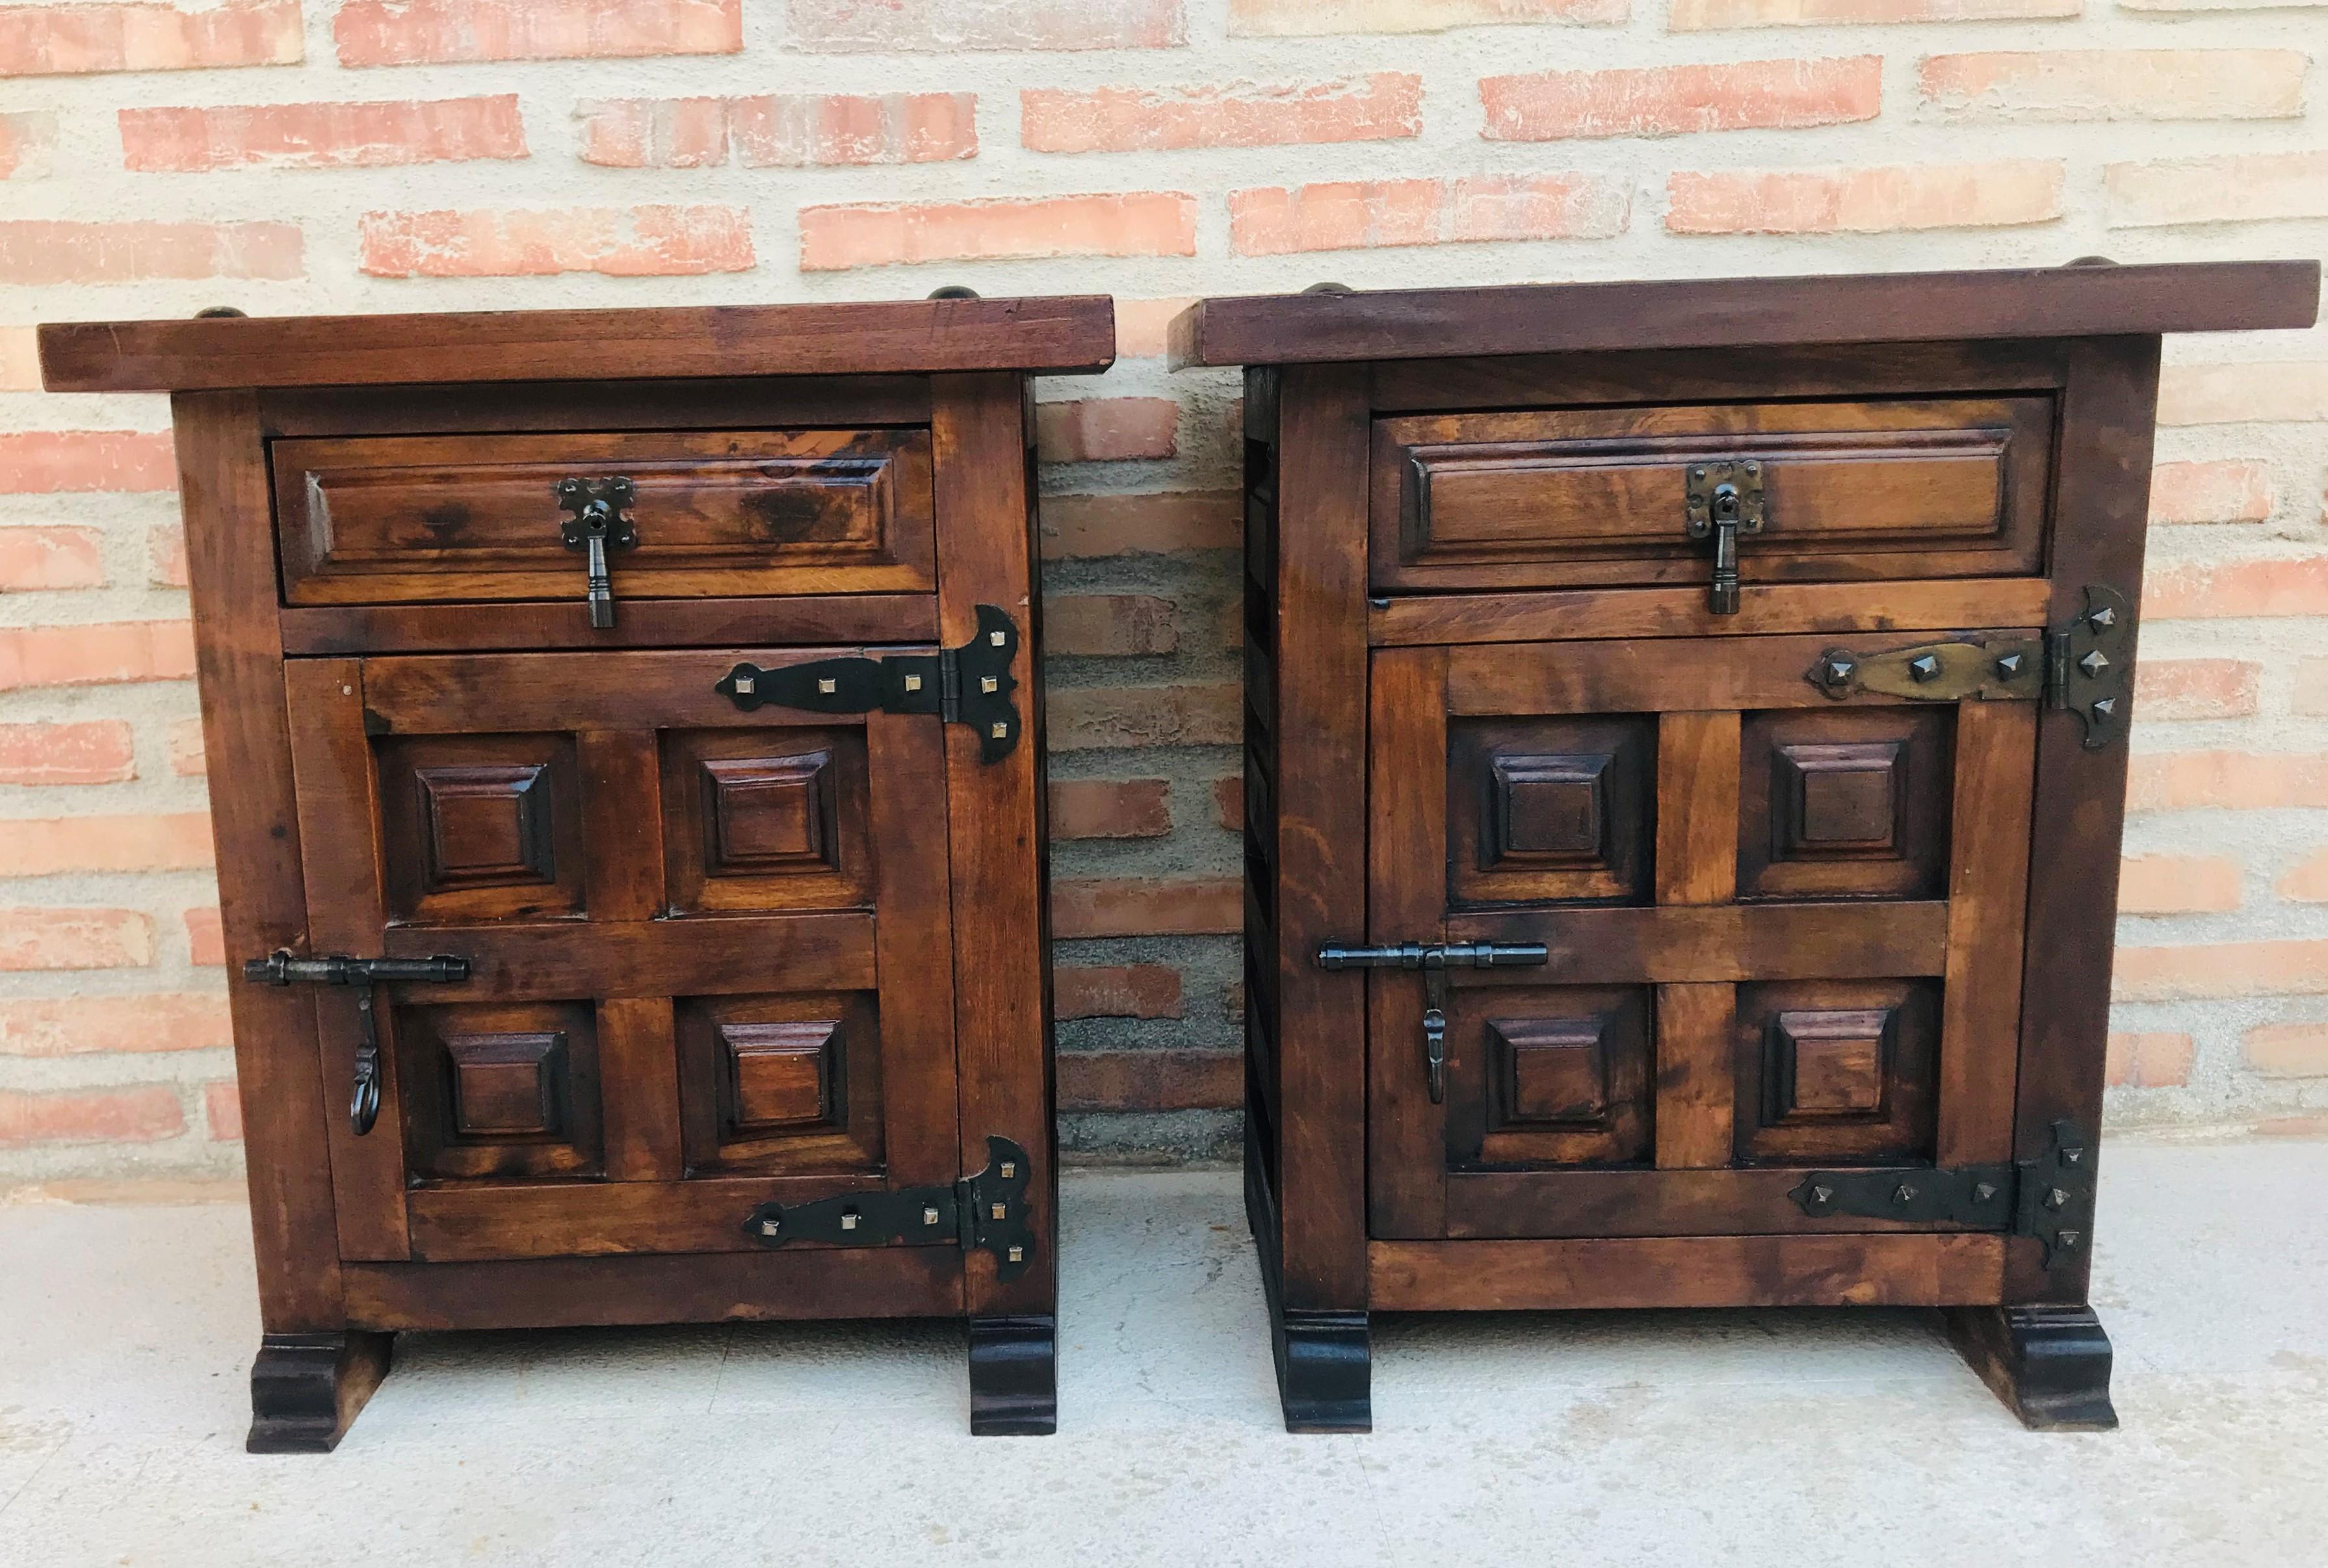 20th century pair of Spanish nightstands with carved drawer, one door and iron hardware.
Beautiful tables that you can use like a nightstands or side tables, end tables... or table lamp.